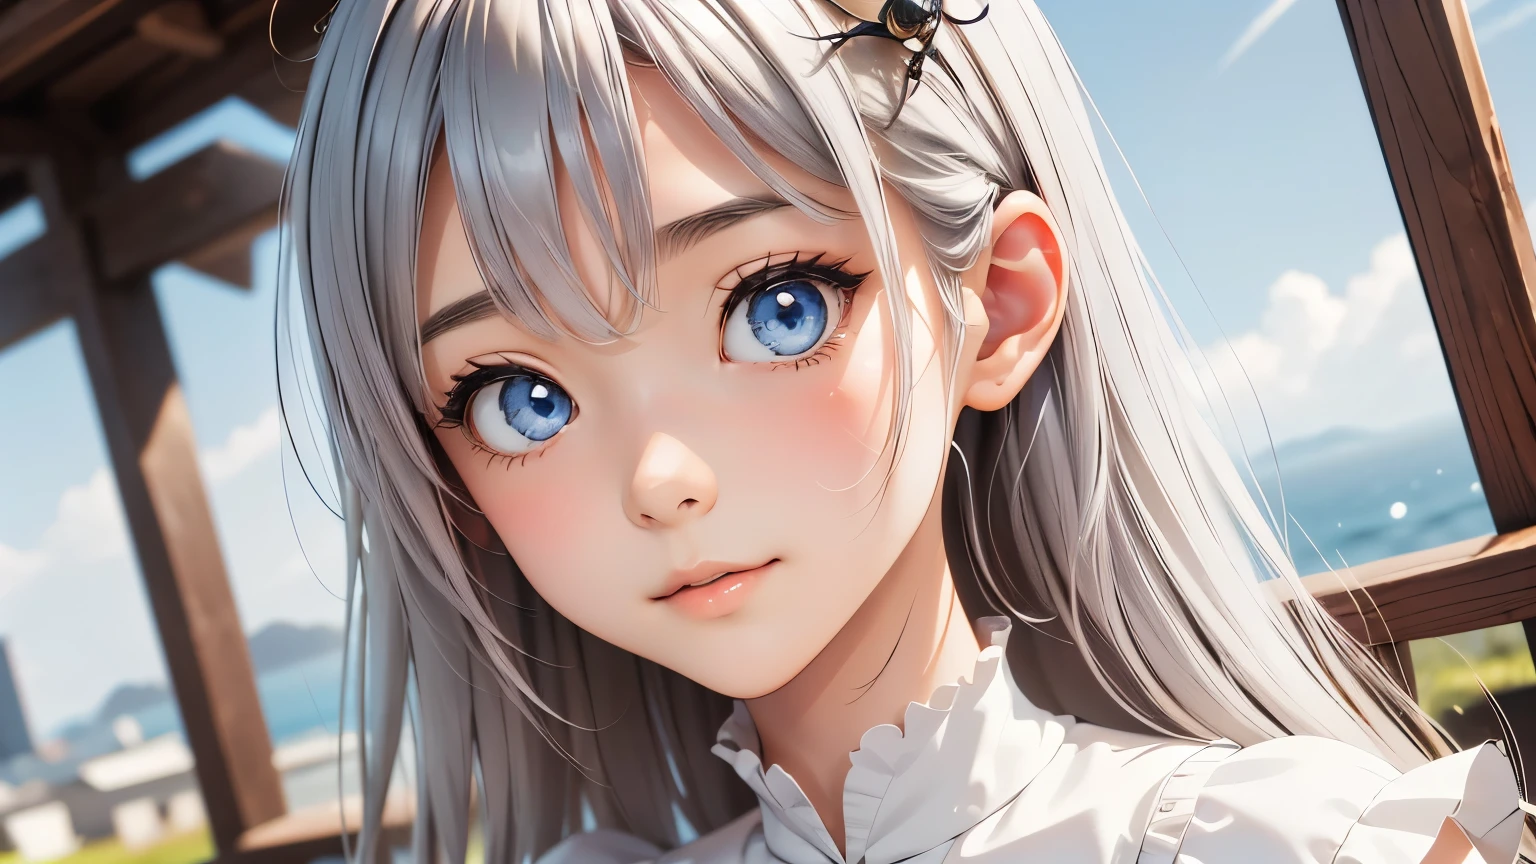 detailed face, cute face, ((masterpiece)), (Highest quality))), (Character design sheet, National costume, same characters, front, ~ side, return), figure, 1 girl, whole body, Silver Hair, eyes hair, Beautiful Eyes, Princess Cut, Environmental change scene, Short skirt, Shyness, woman, girl, Are standing, Gothic Lolita, VTuber, Chartern Betarola, (simple returnground, white returnground: 1.3) ( masterpiece:1.2), (Highest quality:1.3)